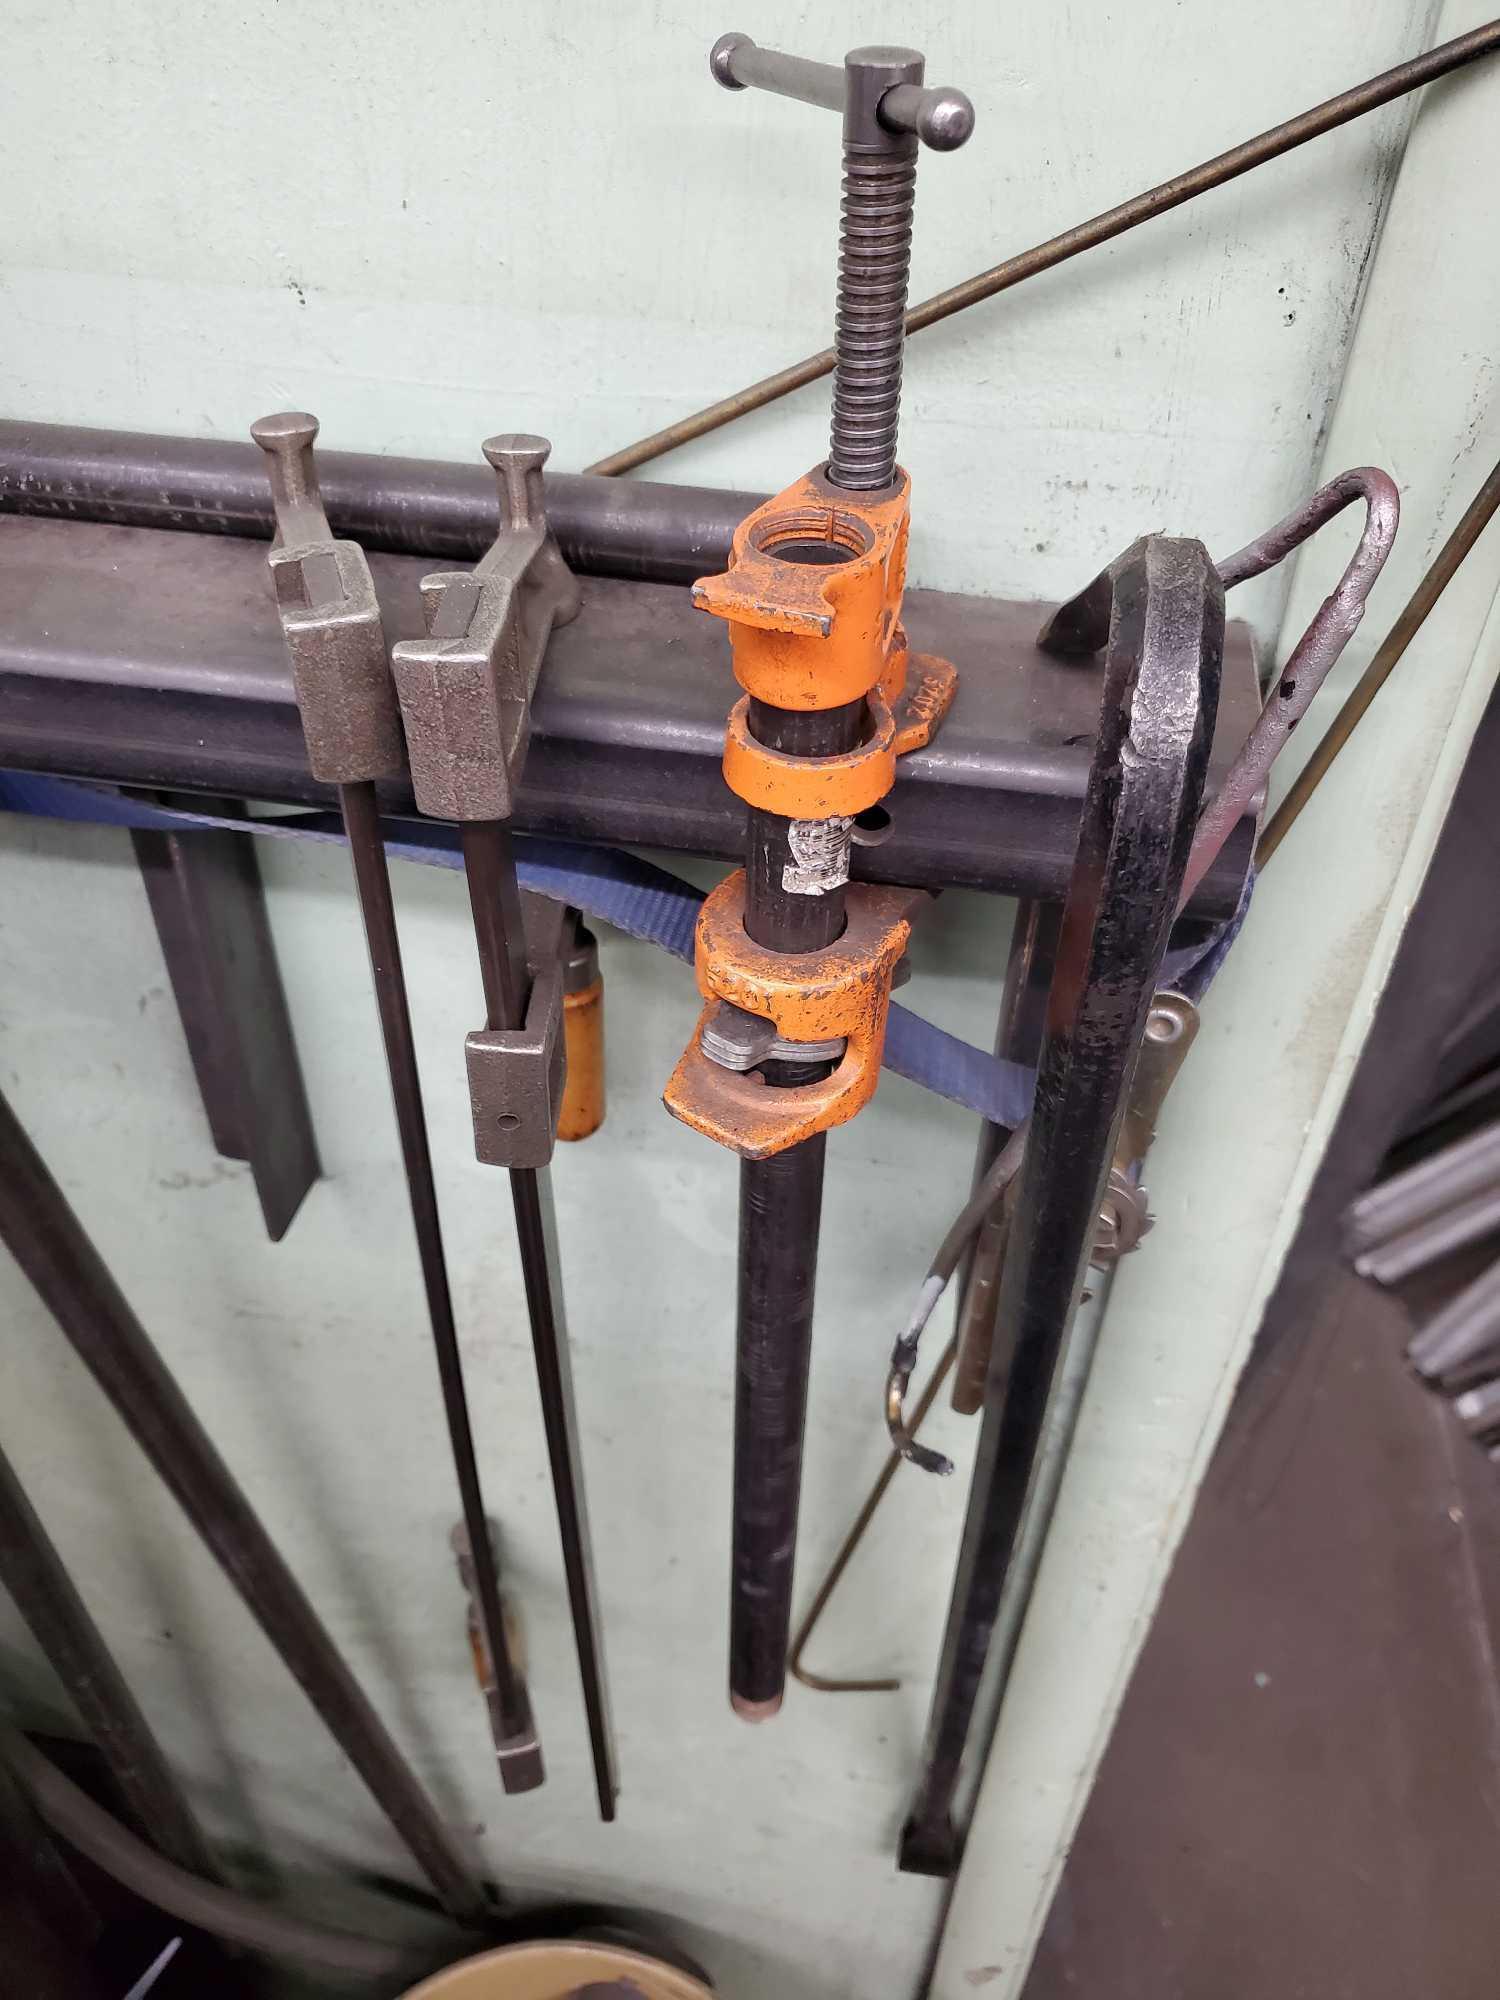 PONY CLAMPS, B&C CLAMPS AND PRY BAR